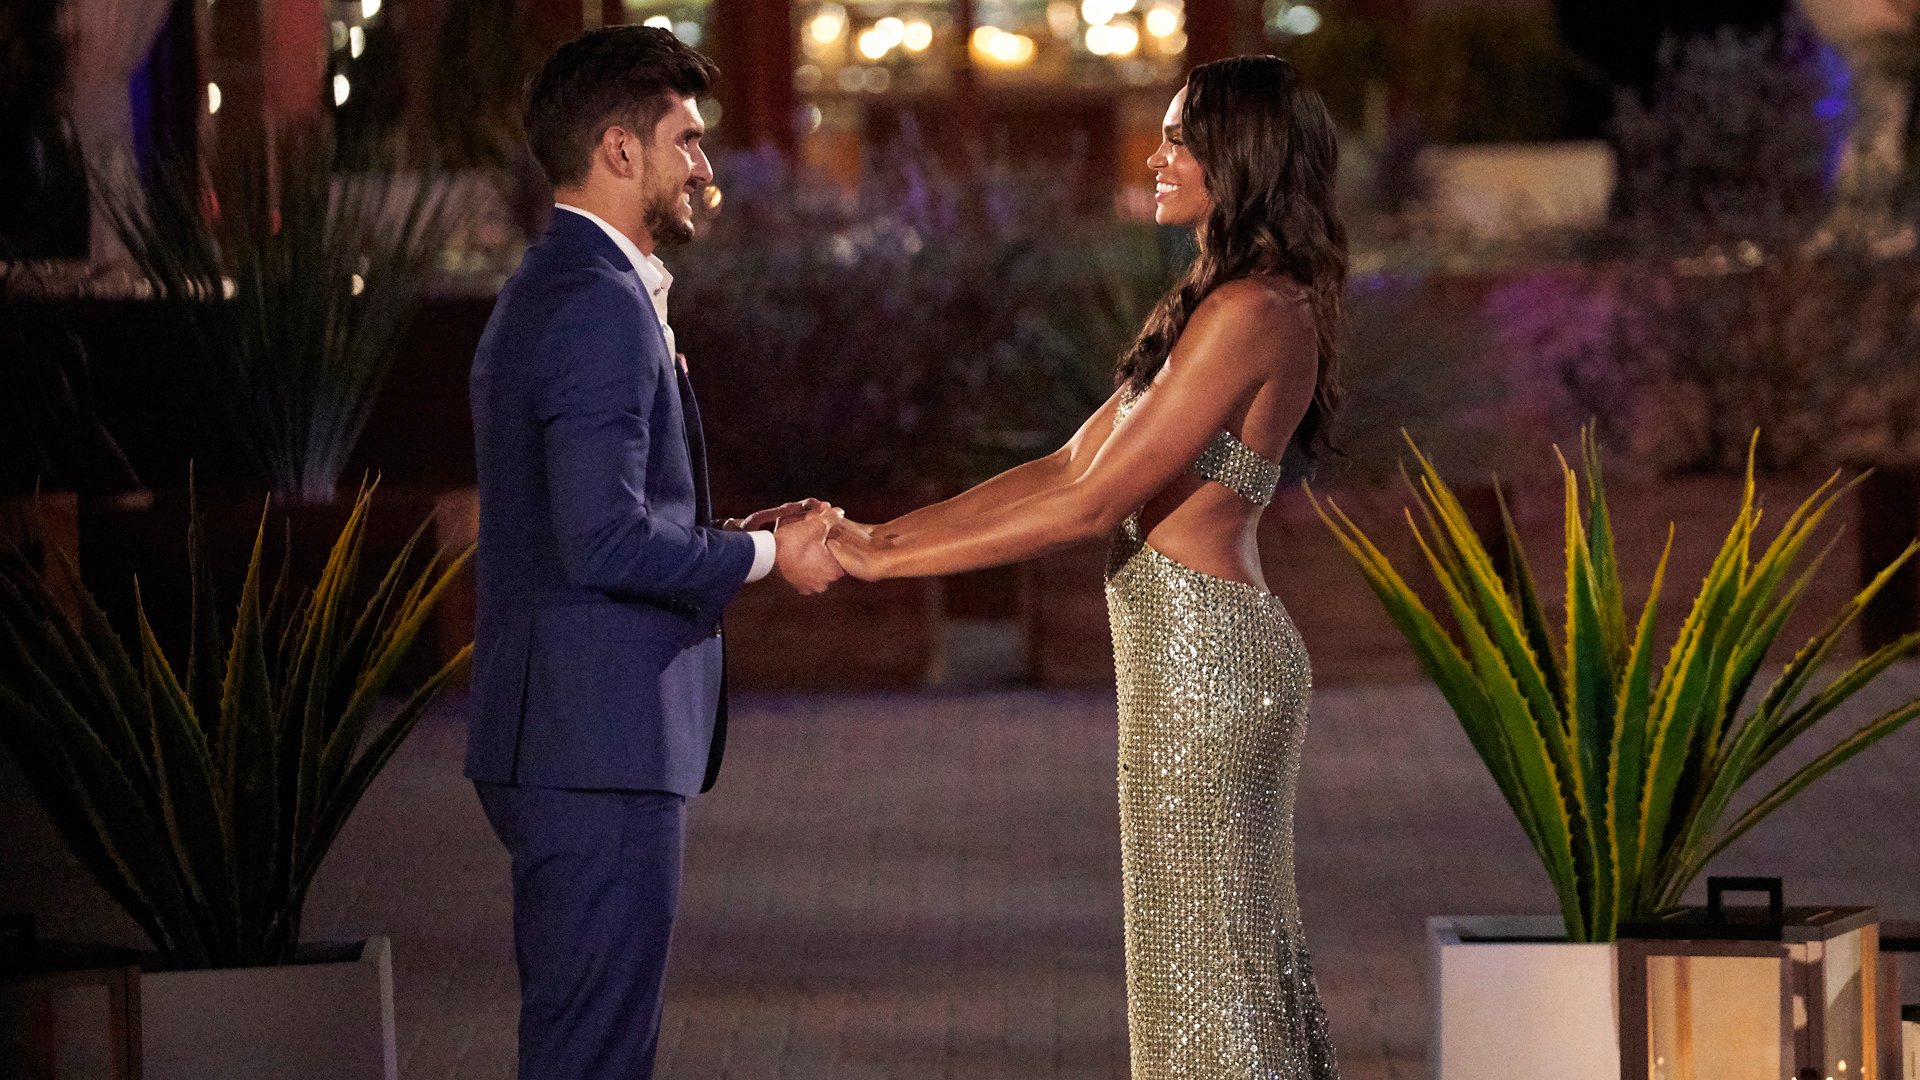 Ryan Fox and Michelle Young meet for the first time in ‘The Bachelorette’ Season 18 premiere